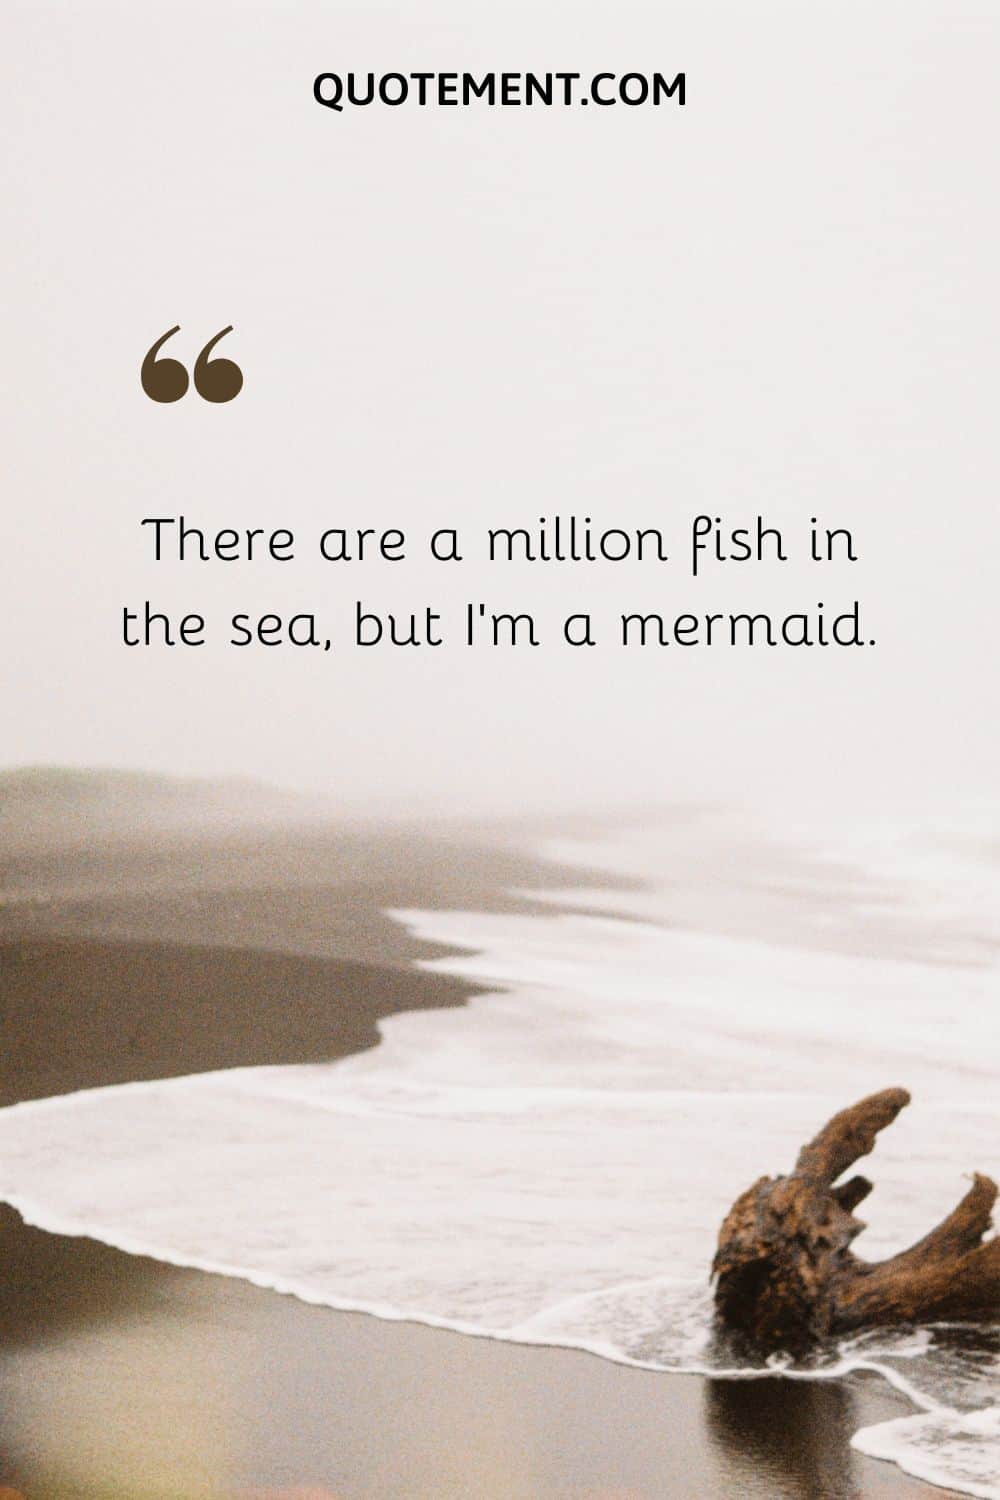 There are a million fish in the sea, but I’m a mermaid.